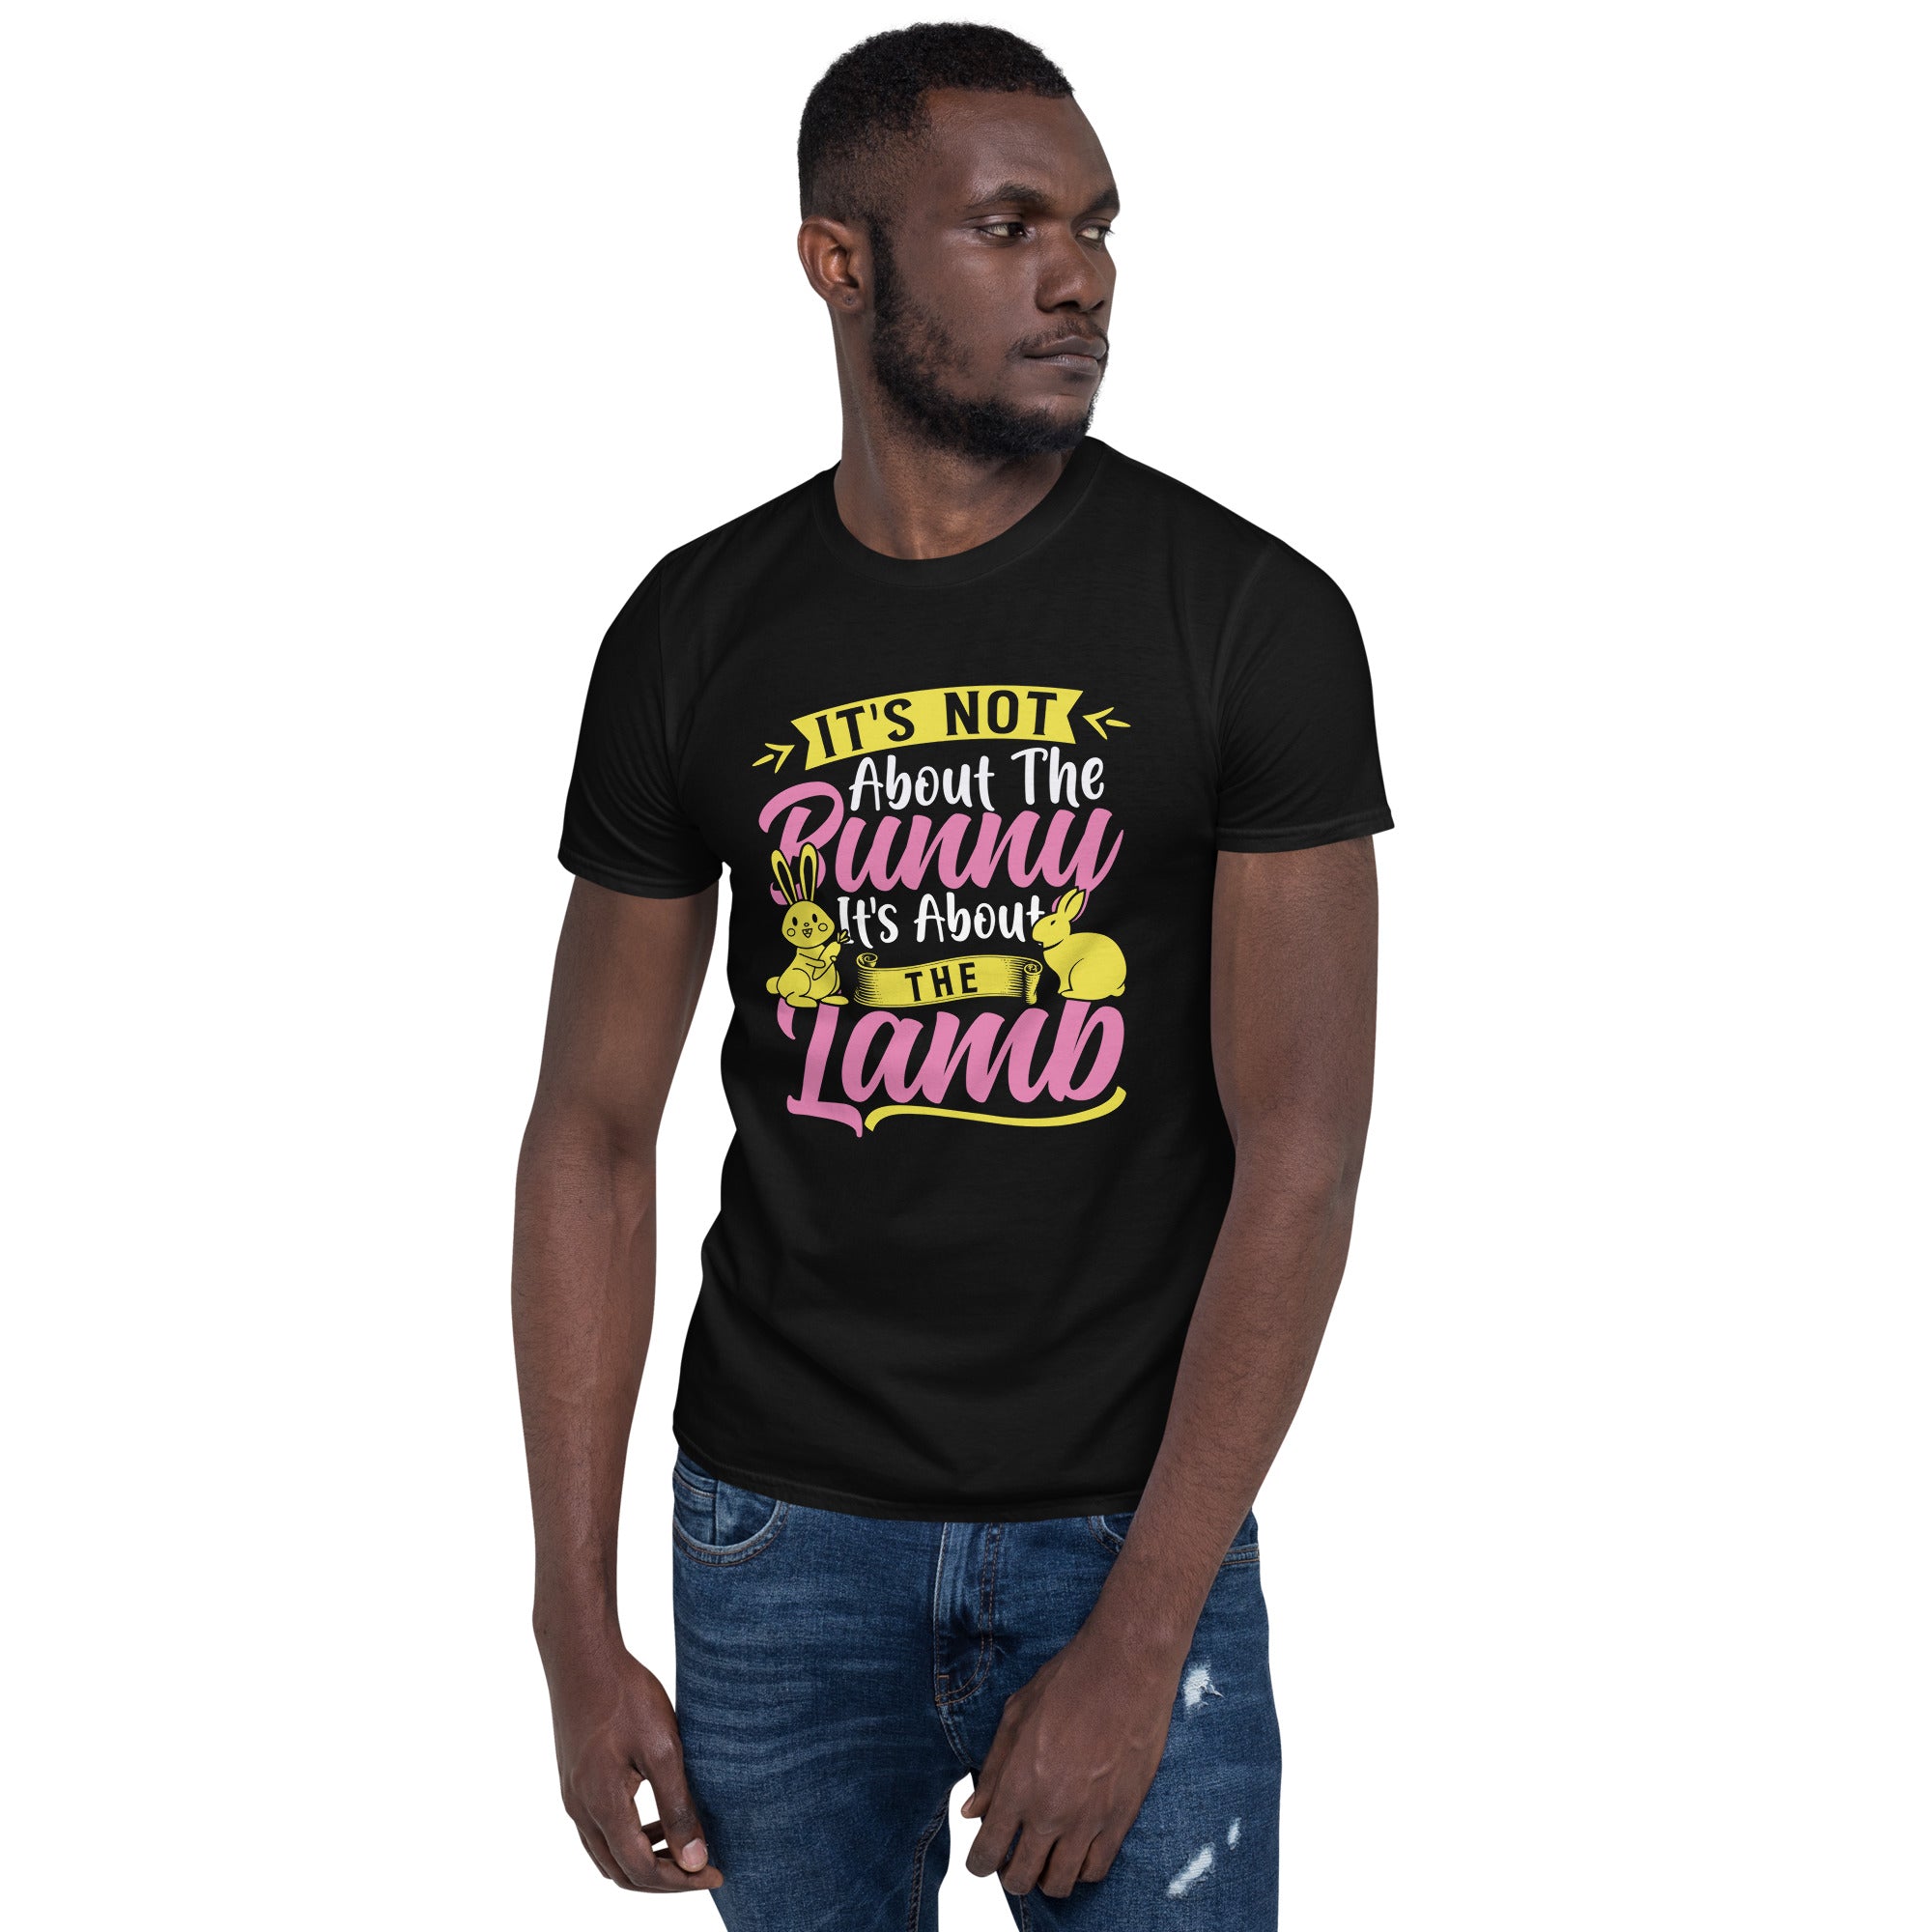 It's Not About The Bunny - Short-Sleeve Unisex T-Shirt